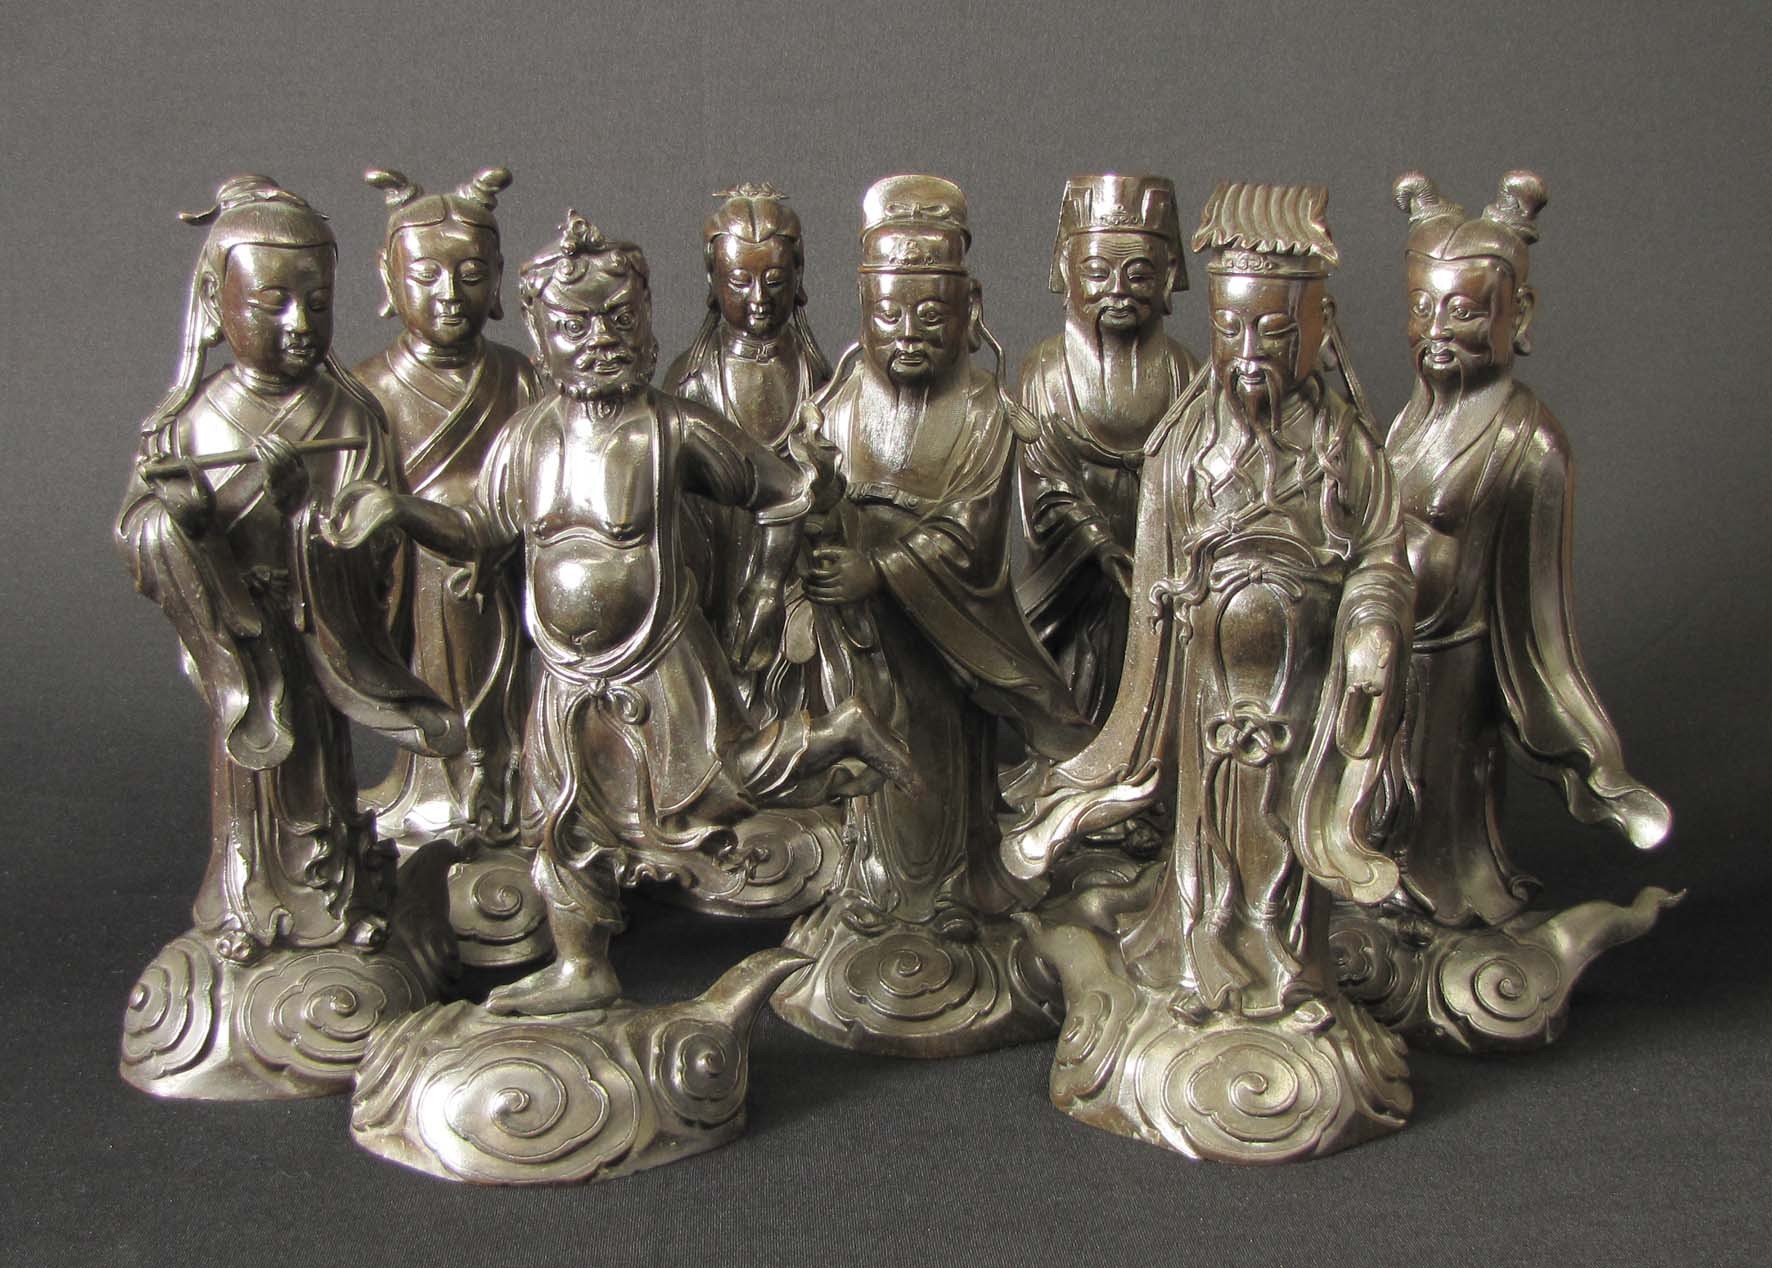 GROUP OF THE EIGHT IMMORTALS